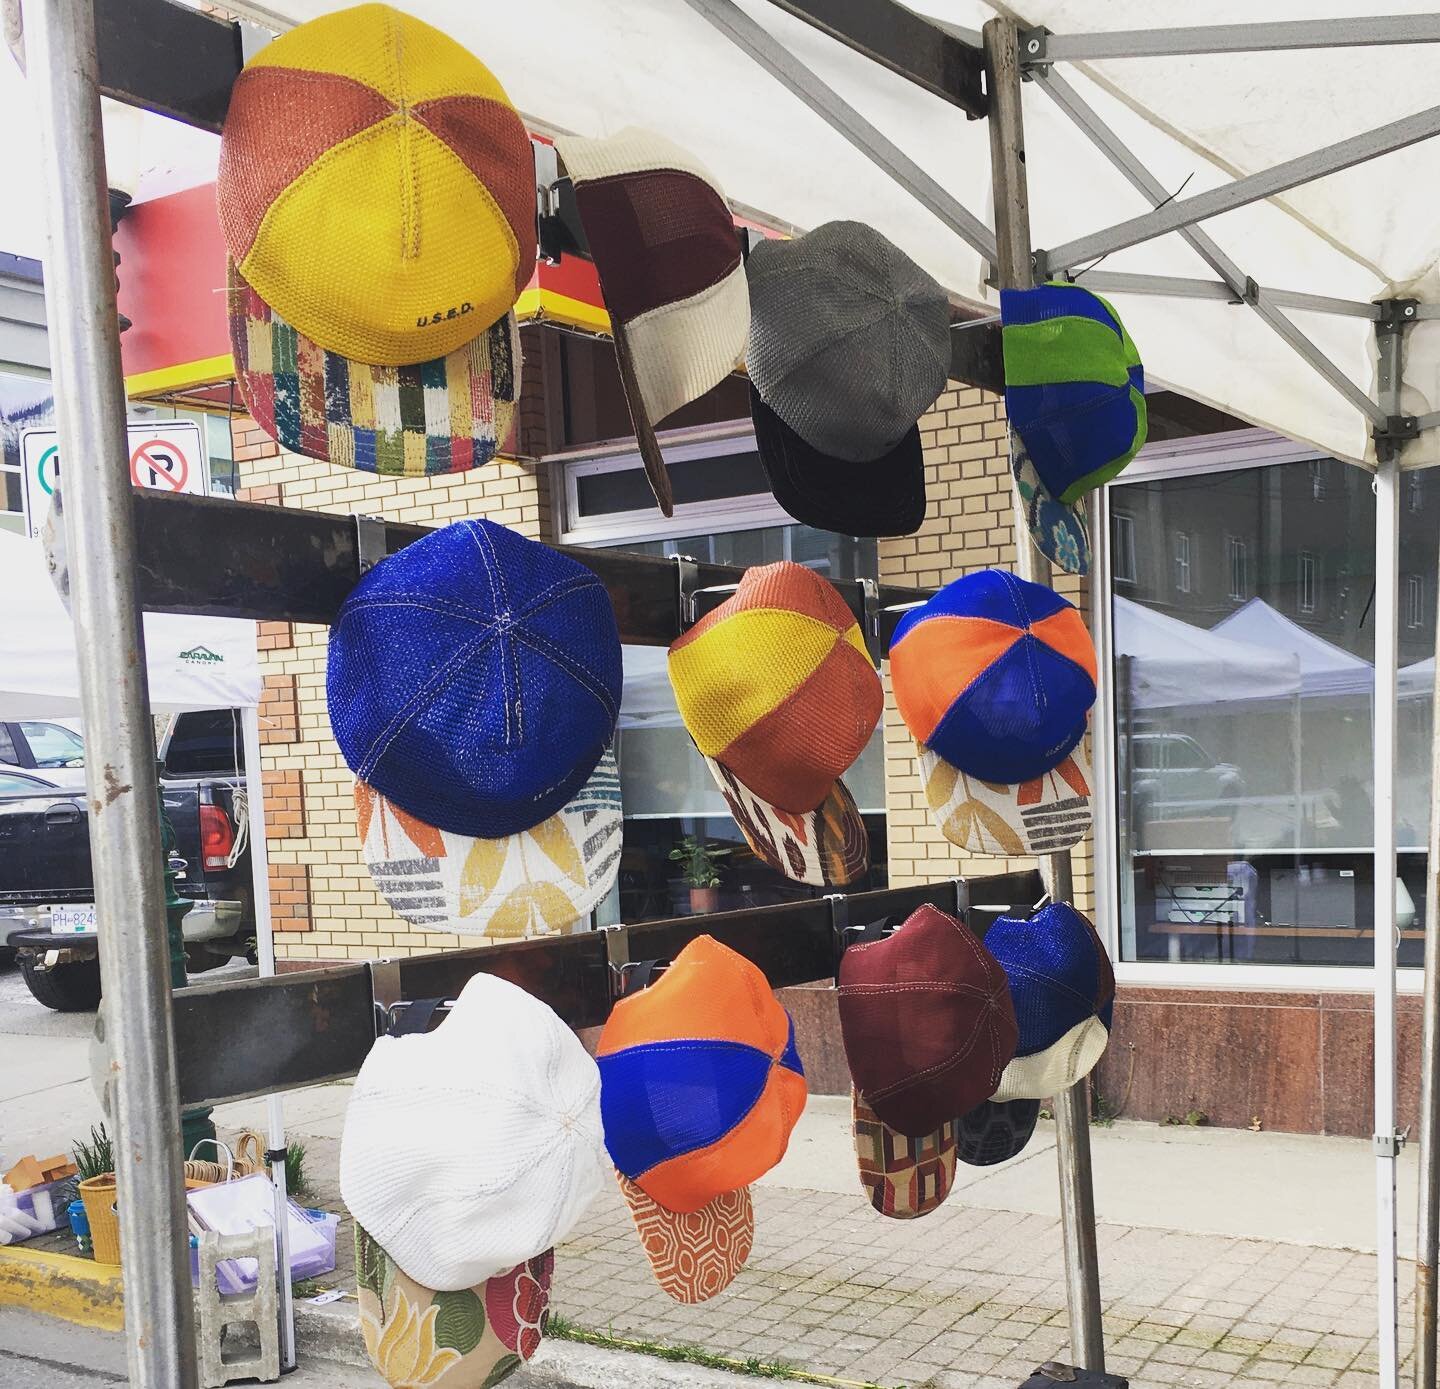 Hats!!! Getchya hands on some of these babies!

All made from a combination of shade sail cut offs and upcycled fabric samples the local furniture store. 

Each is 100% ONE OF A KIND

Check us out June 4th at the LFI market or send us a message to se